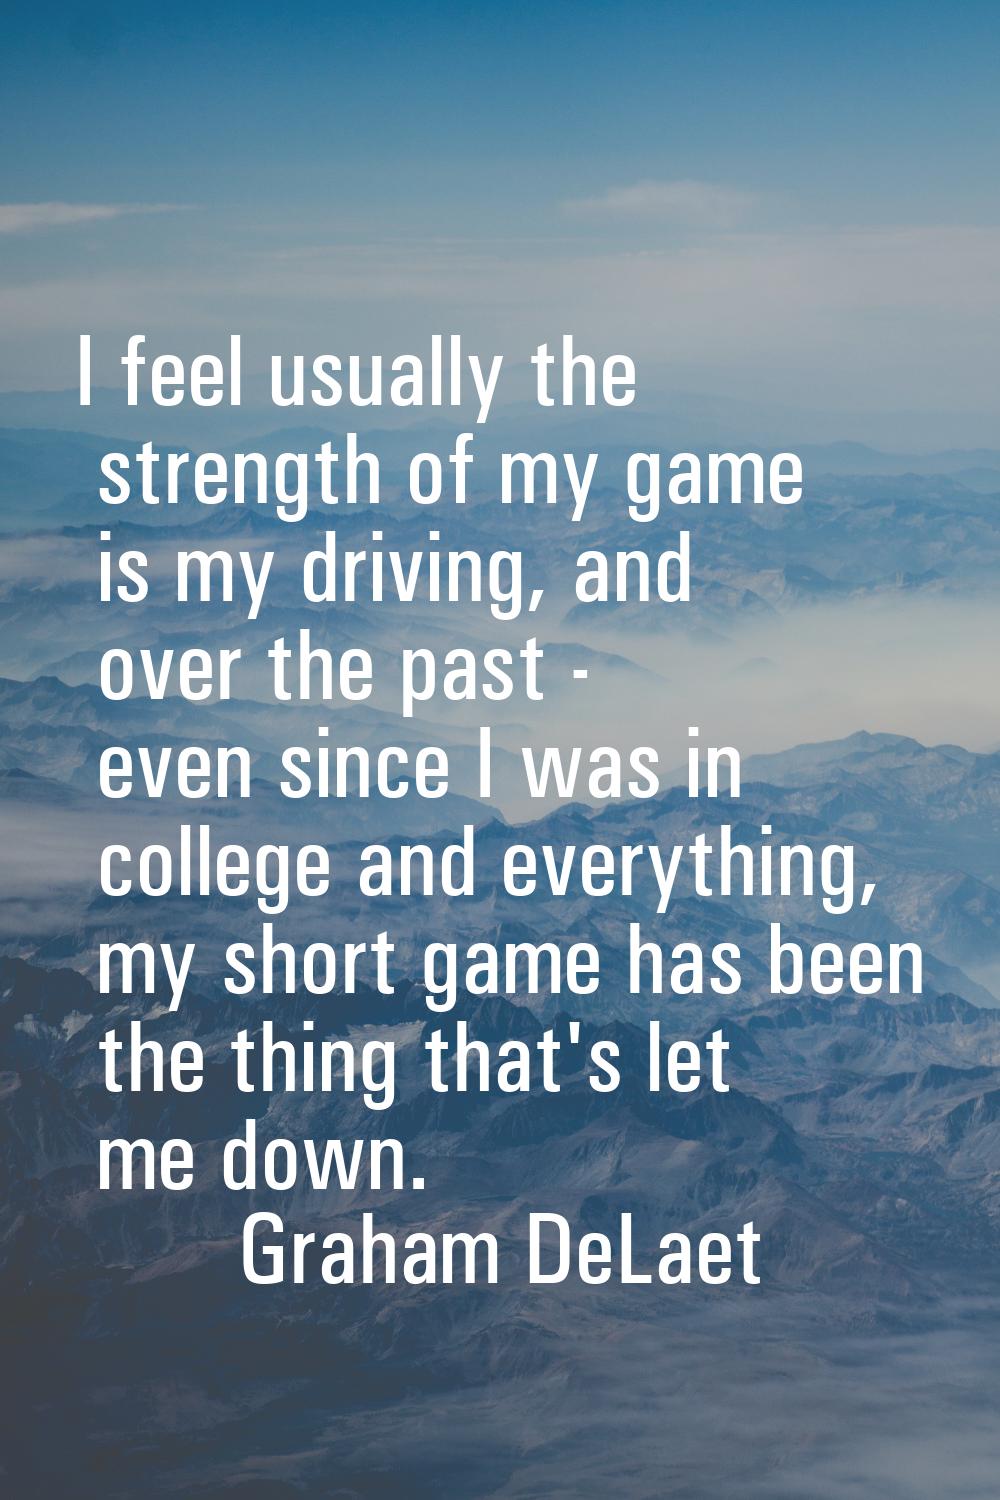 I feel usually the strength of my game is my driving, and over the past - even since I was in colle